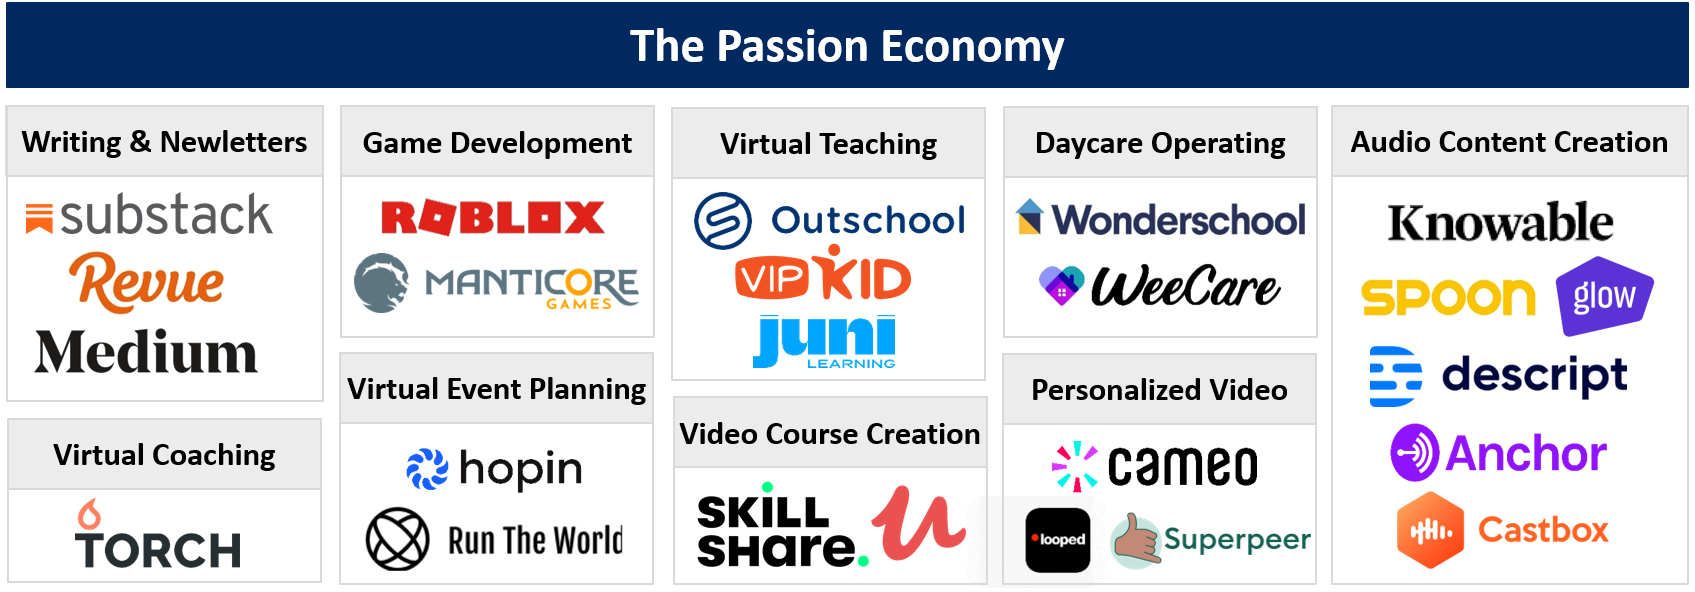 The Passion Economy Is Reinventing Careers - gv read description roblox